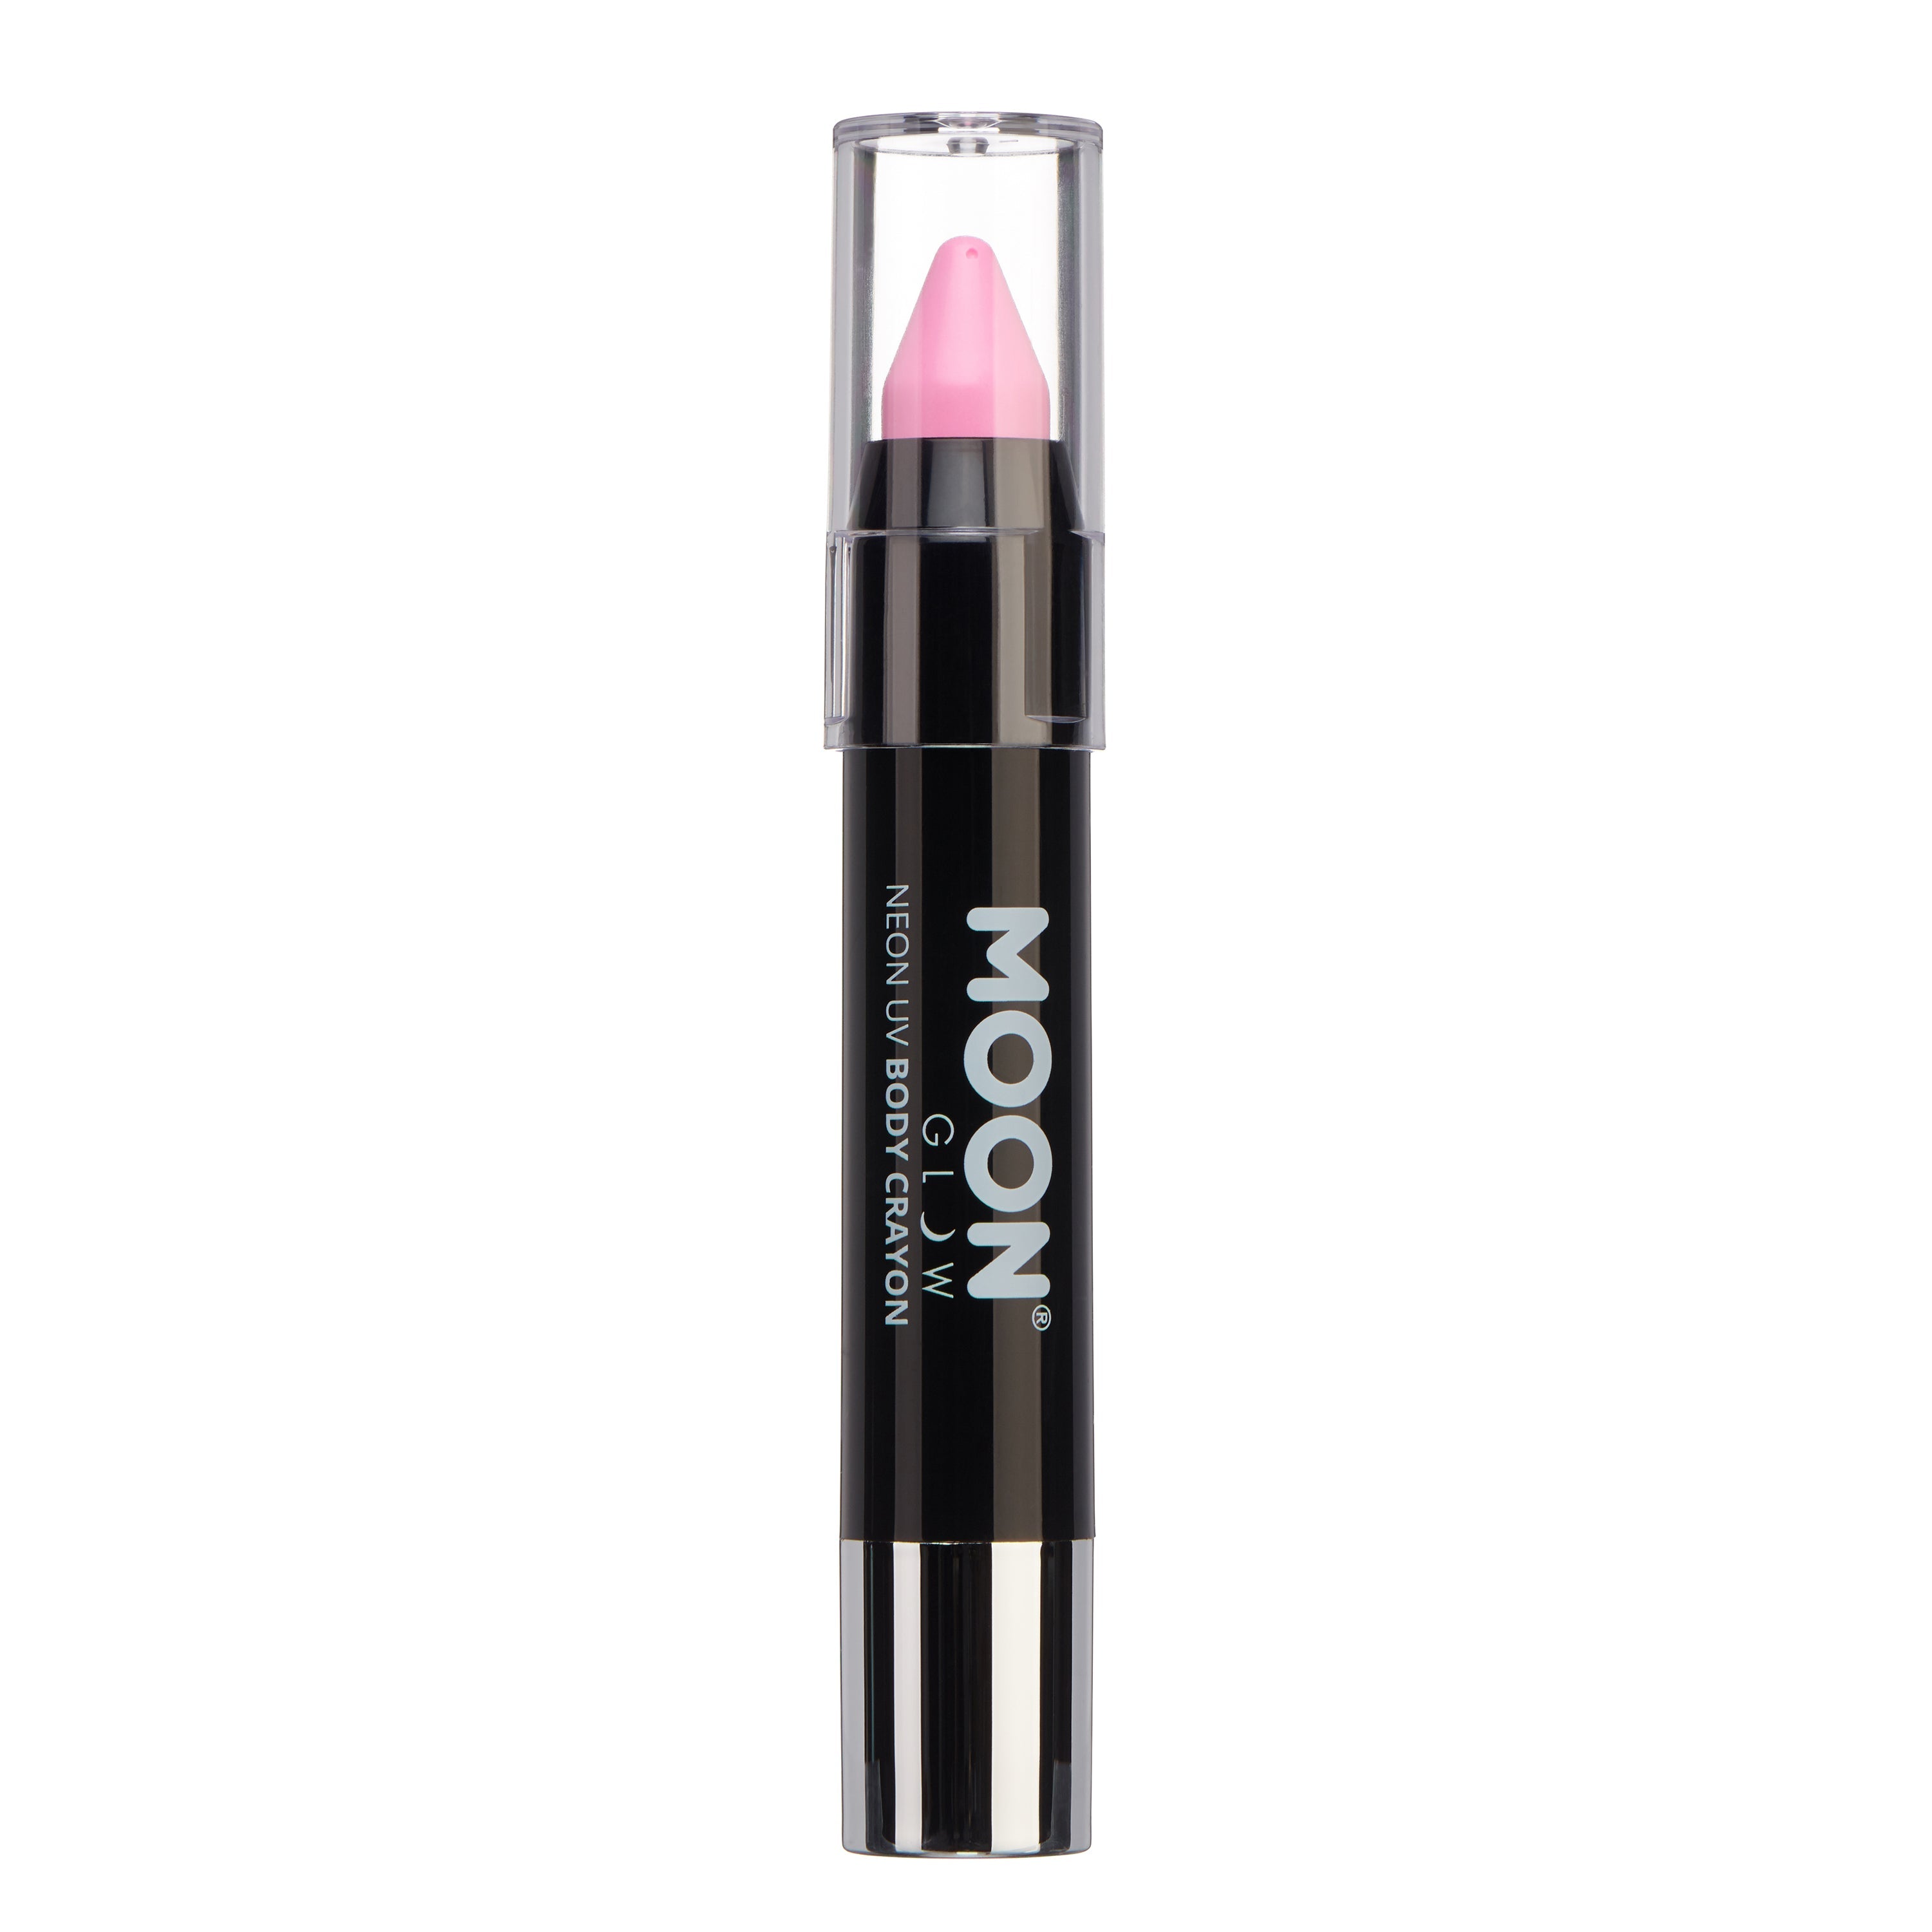 Pastel Pink - Neon UV Glow Blacklight Face & Body Crayon, 3.5g. Cosmetically certified, FDA & Health Canada compliant and cruelty free.